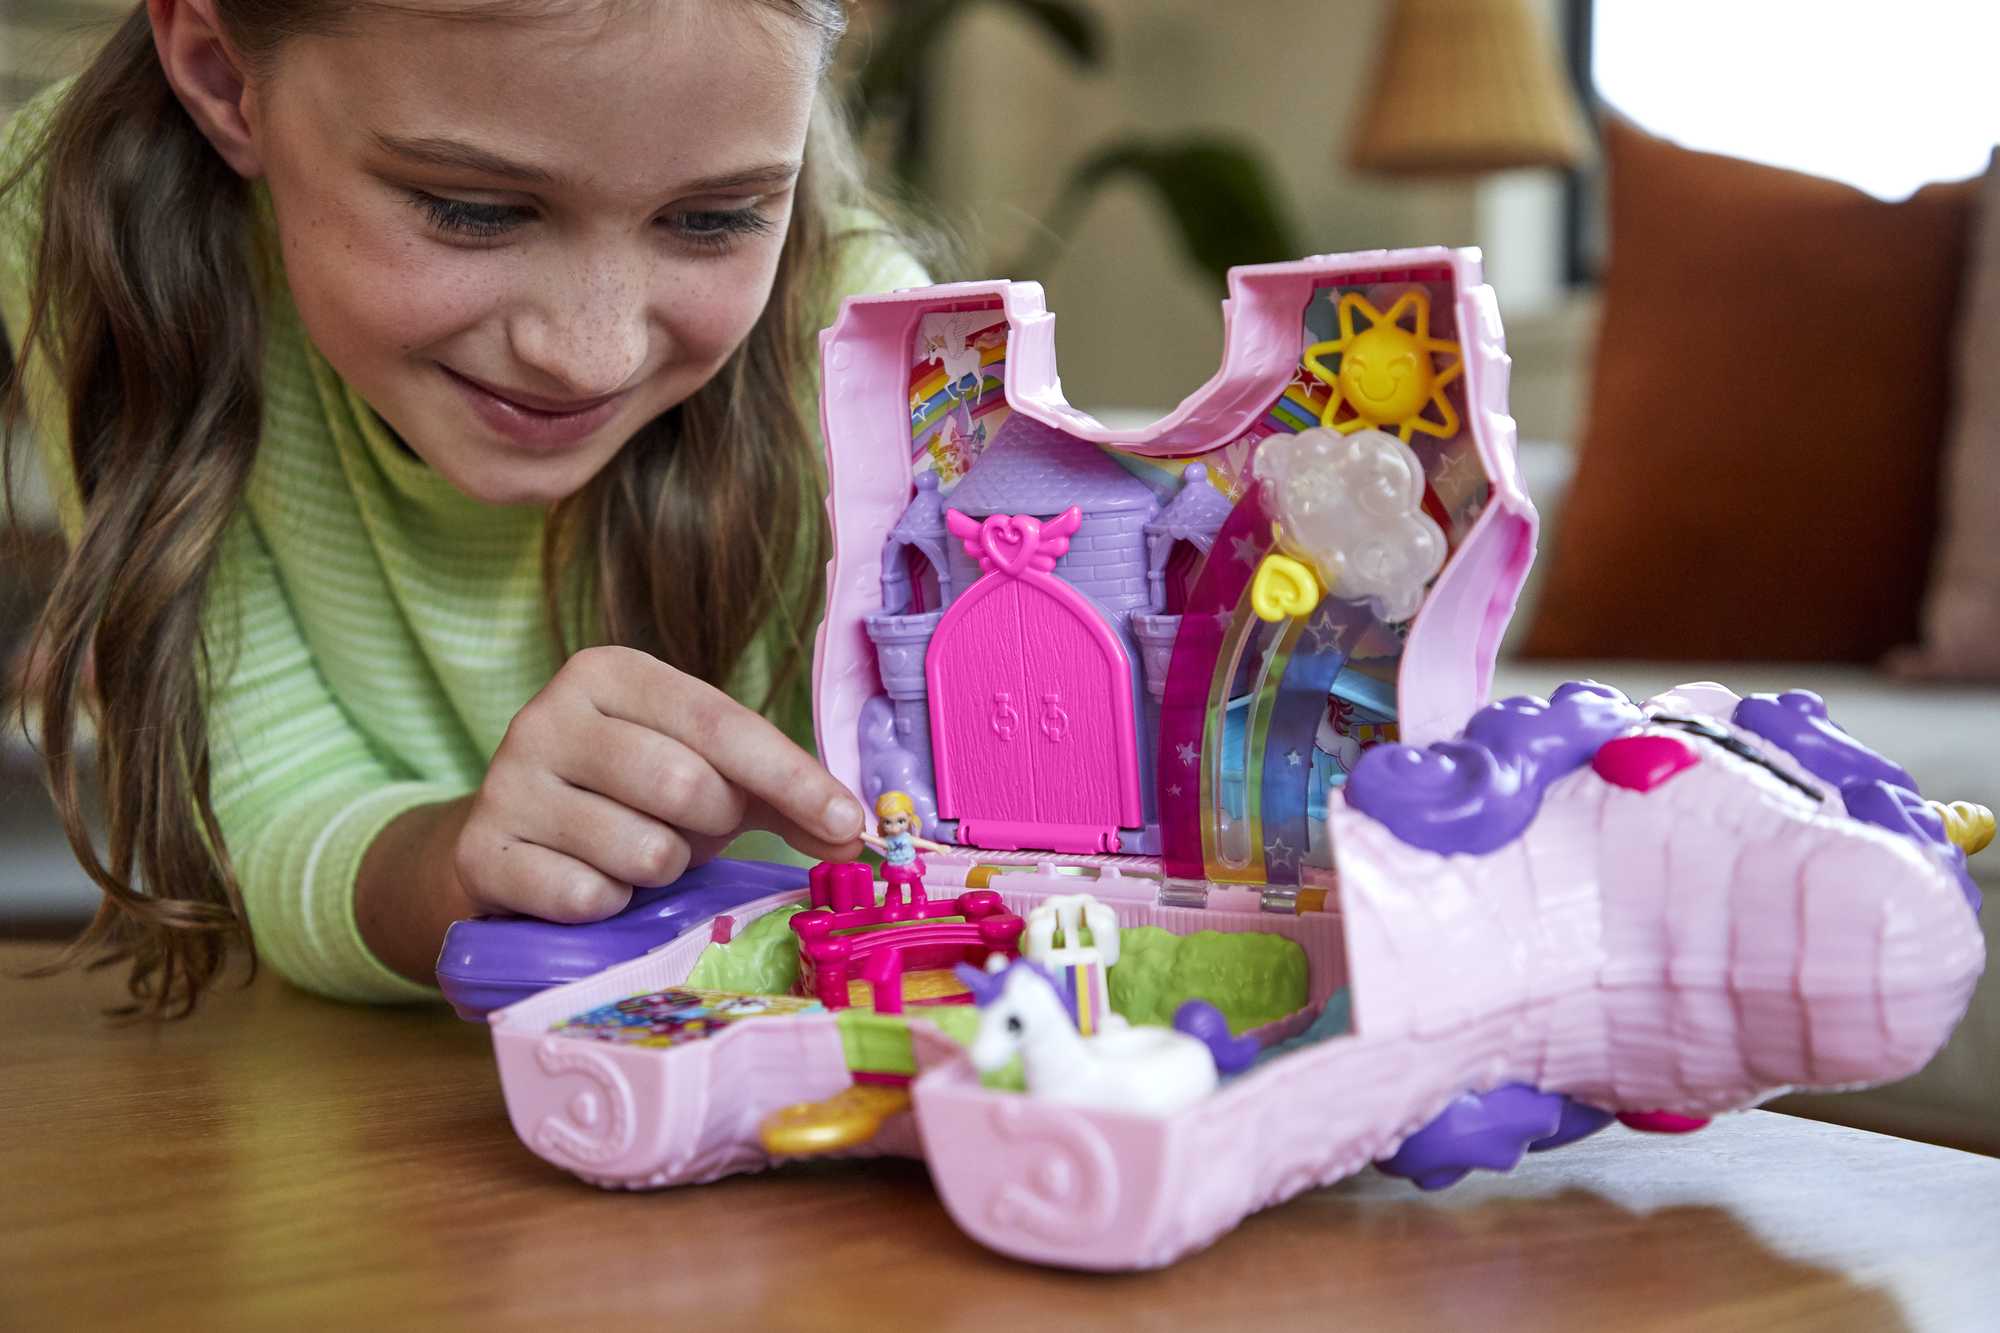 Polly Pocket 2-in-1 Unicorn Party Travel Toy, Large Compact with 2 Dolls &  25 Surprise Accessories 